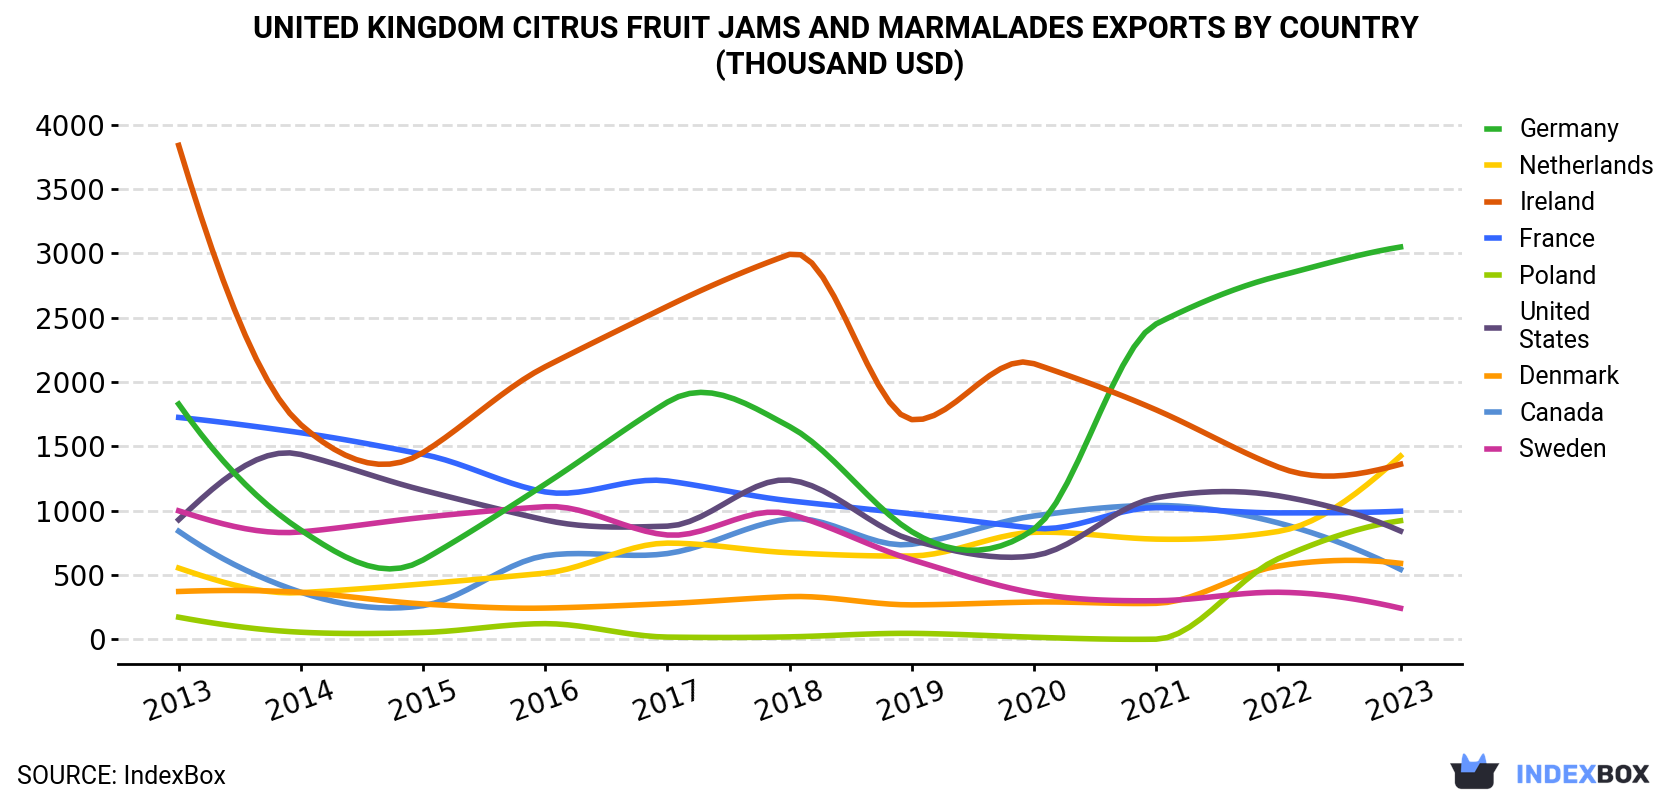 United Kingdom Citrus Fruit Jams and Marmalades Exports By Country (Thousand USD)